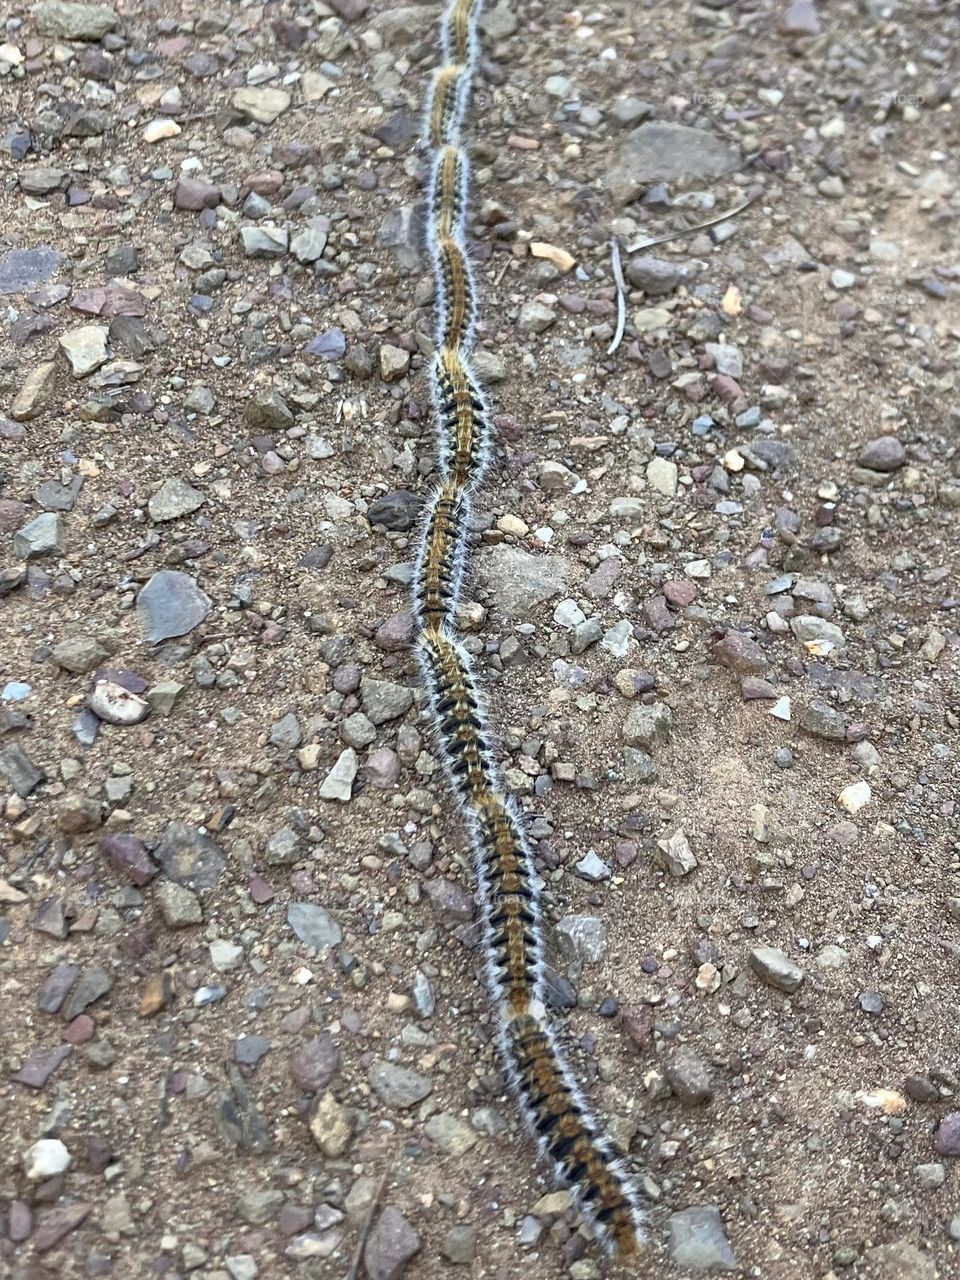 Caterpillars moving in procession